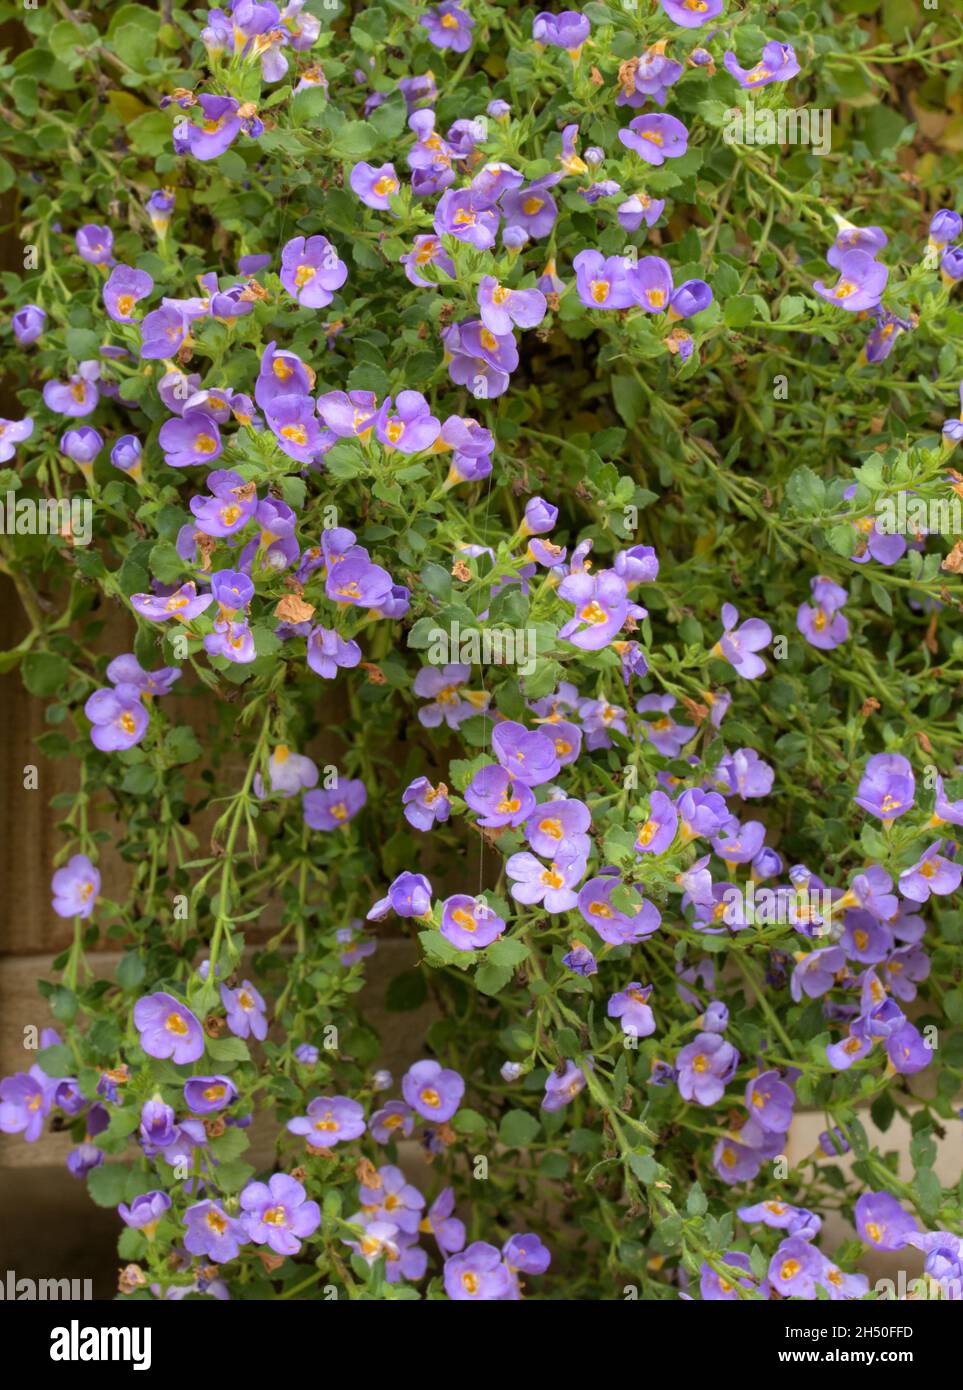 Violet colored Ornamental Bacopa flowers hanging with long trailing branches off a planter Stock Photo